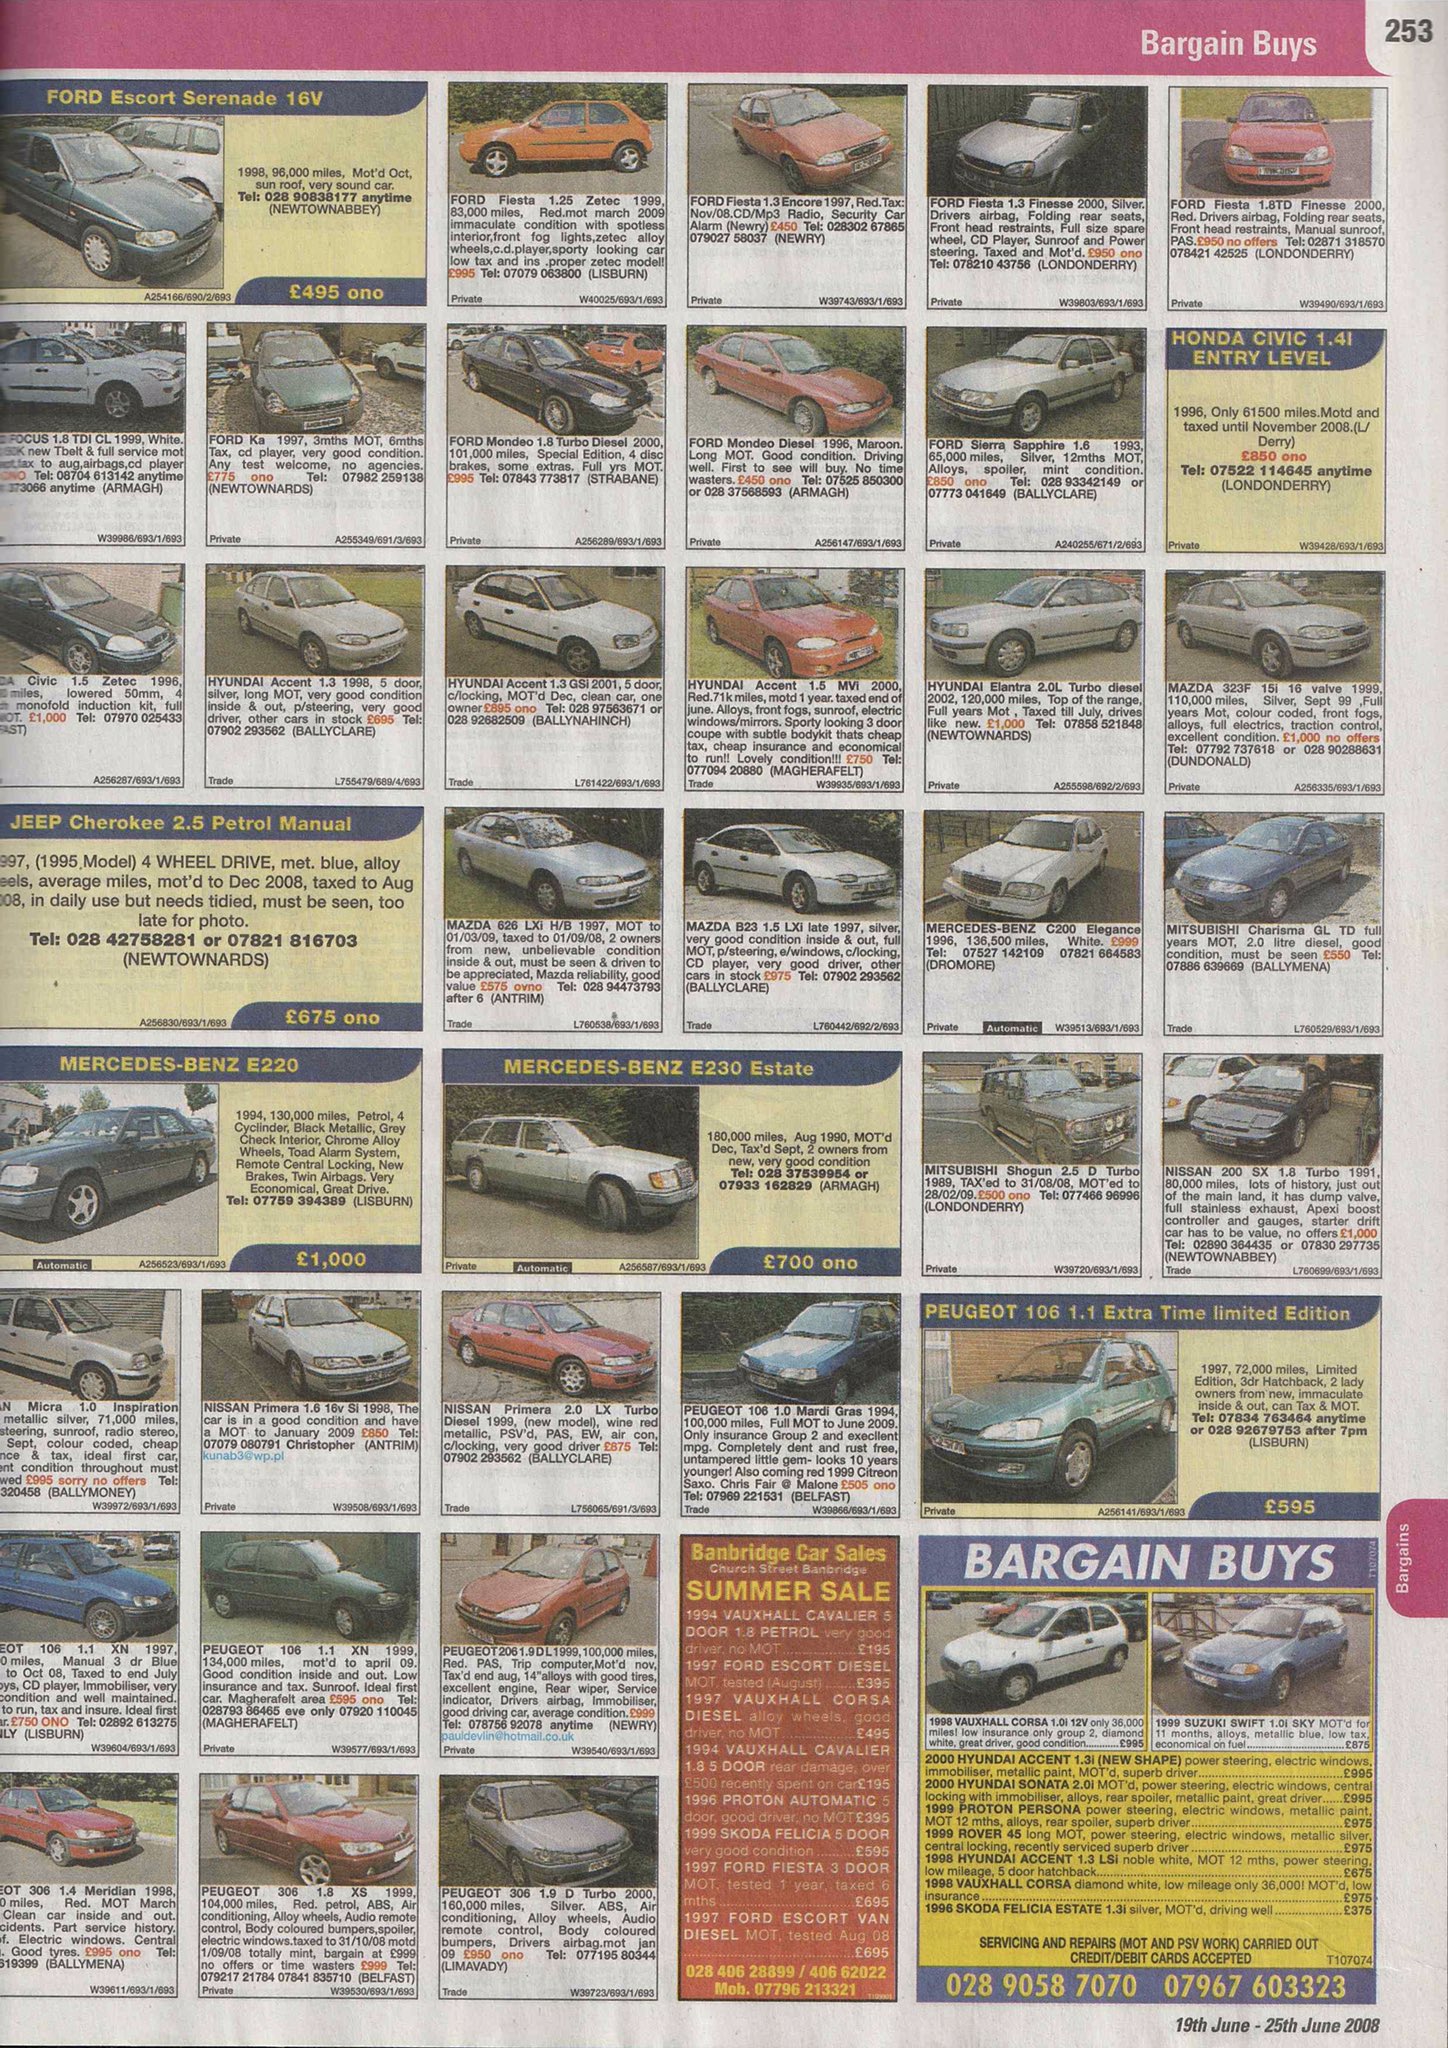 Crapcarcollective The Autotrader Bargain Buys Section Always Had The Ultimate Collection Of Crap Cars Just Look At Those Hyundai Accents Autotrader Uk 19th 25th June 08 Northern Ireland Chodscans